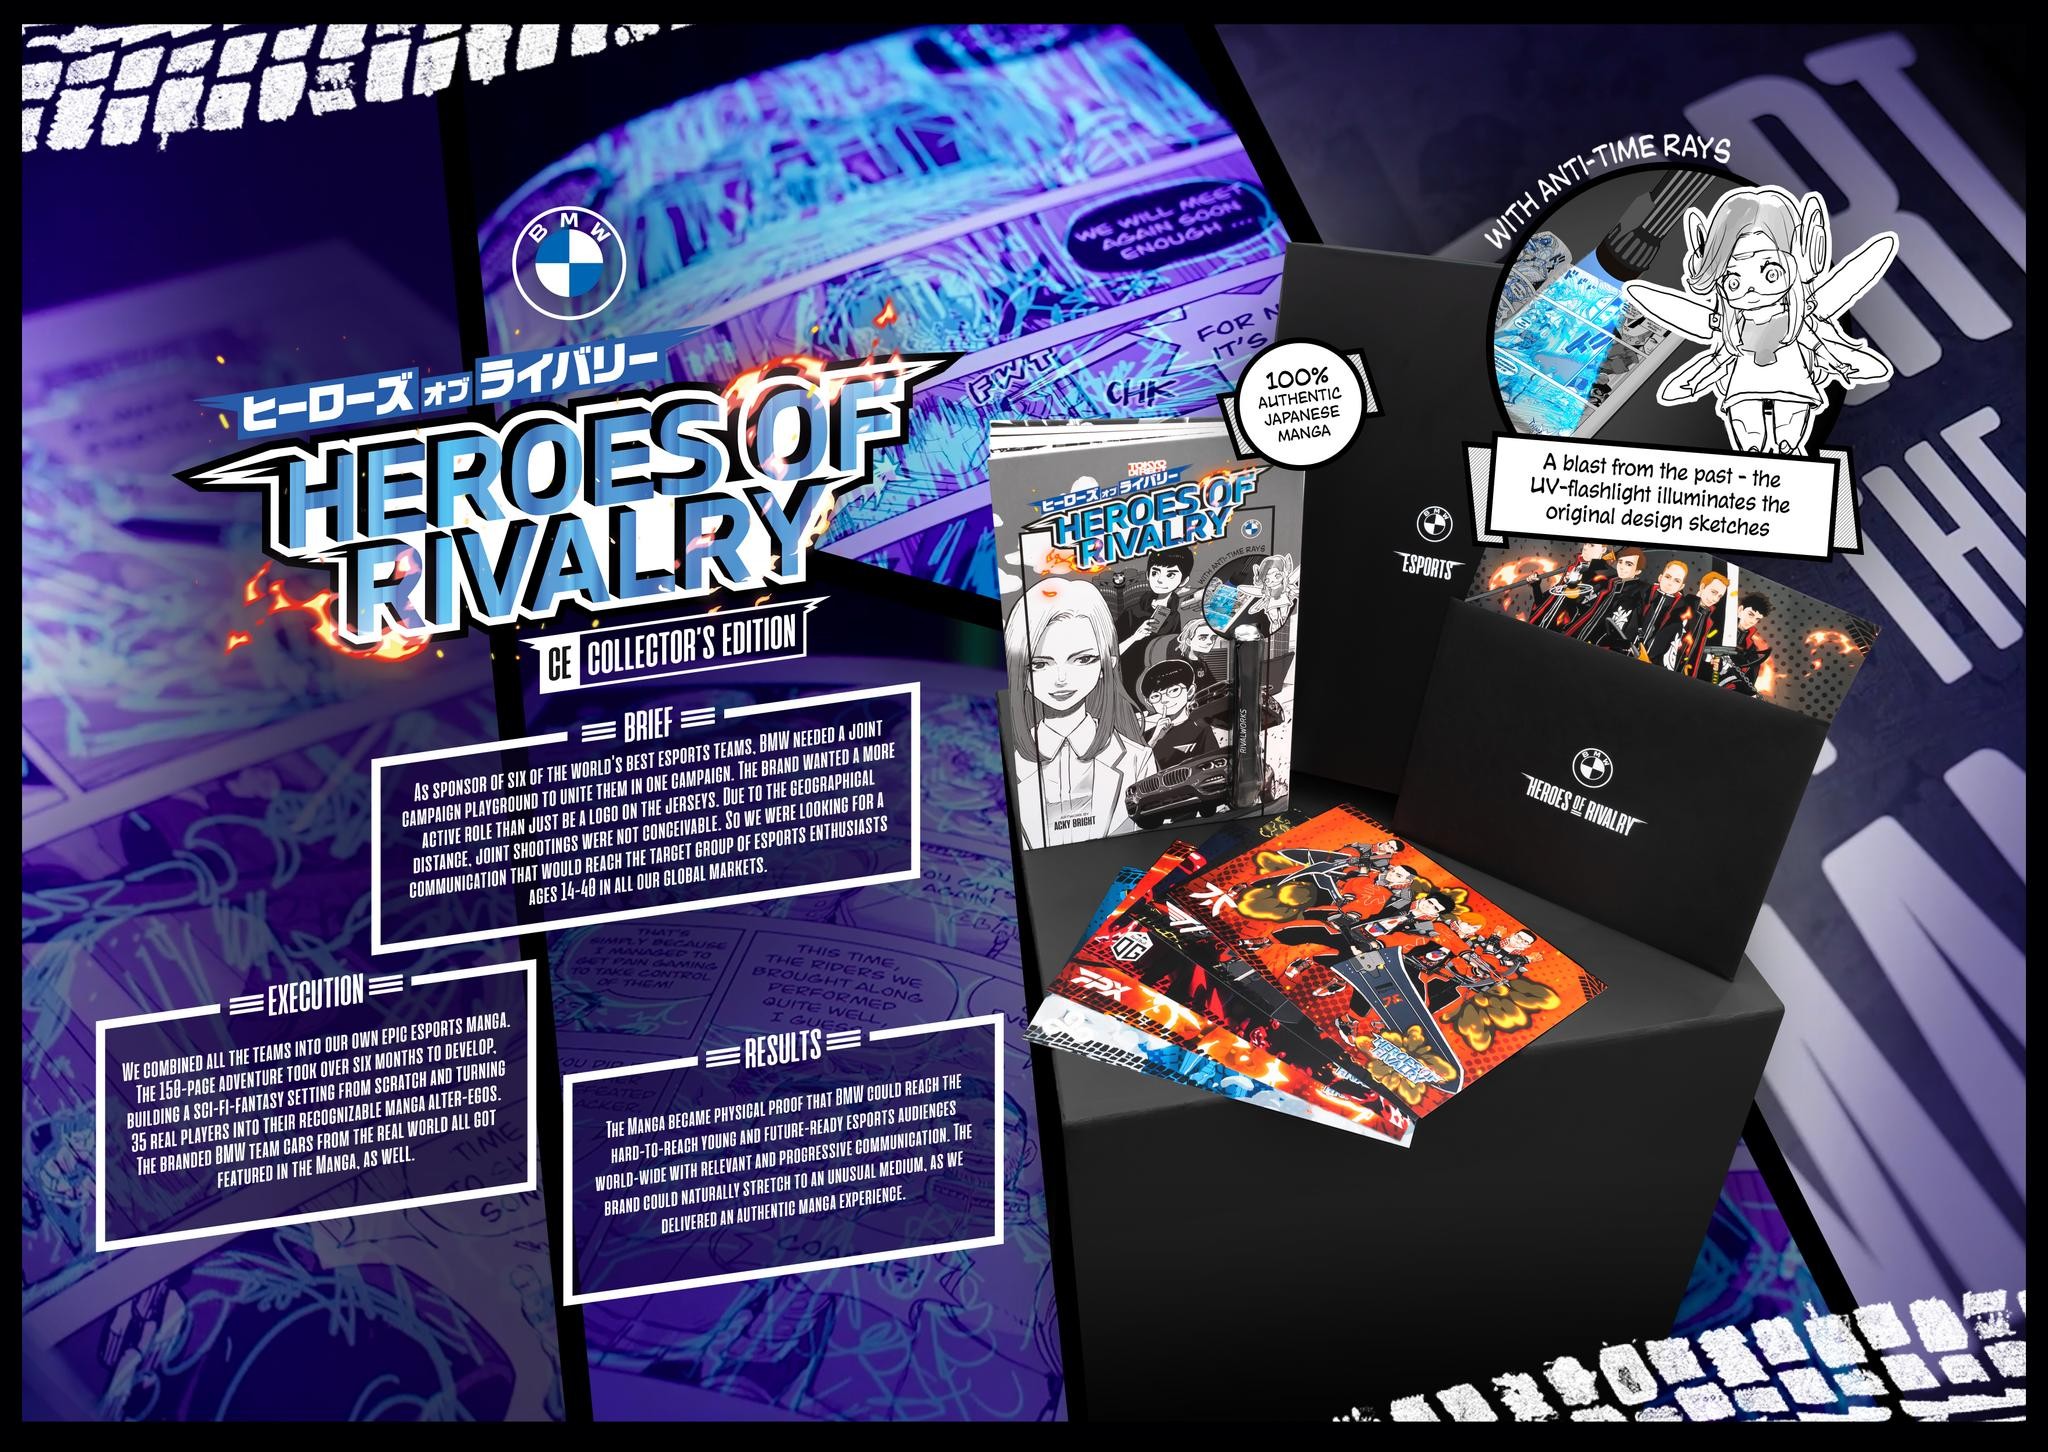 BMW Esports: Heroes of Rivalry Collector's Edition